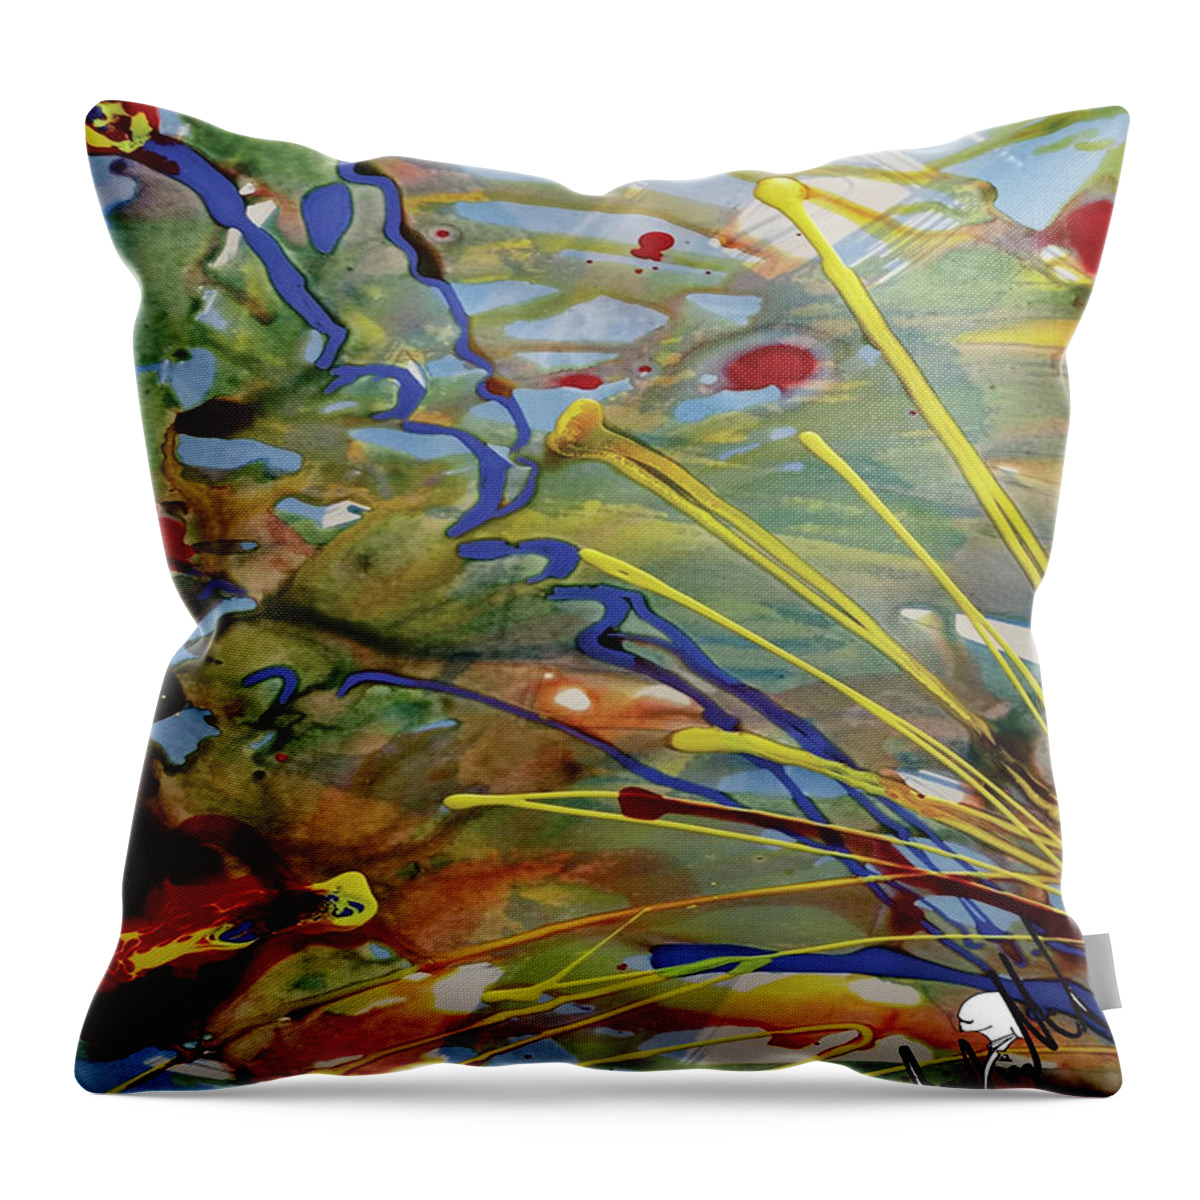  Throw Pillow featuring the painting Burger king11 collection by Jimmy Williams